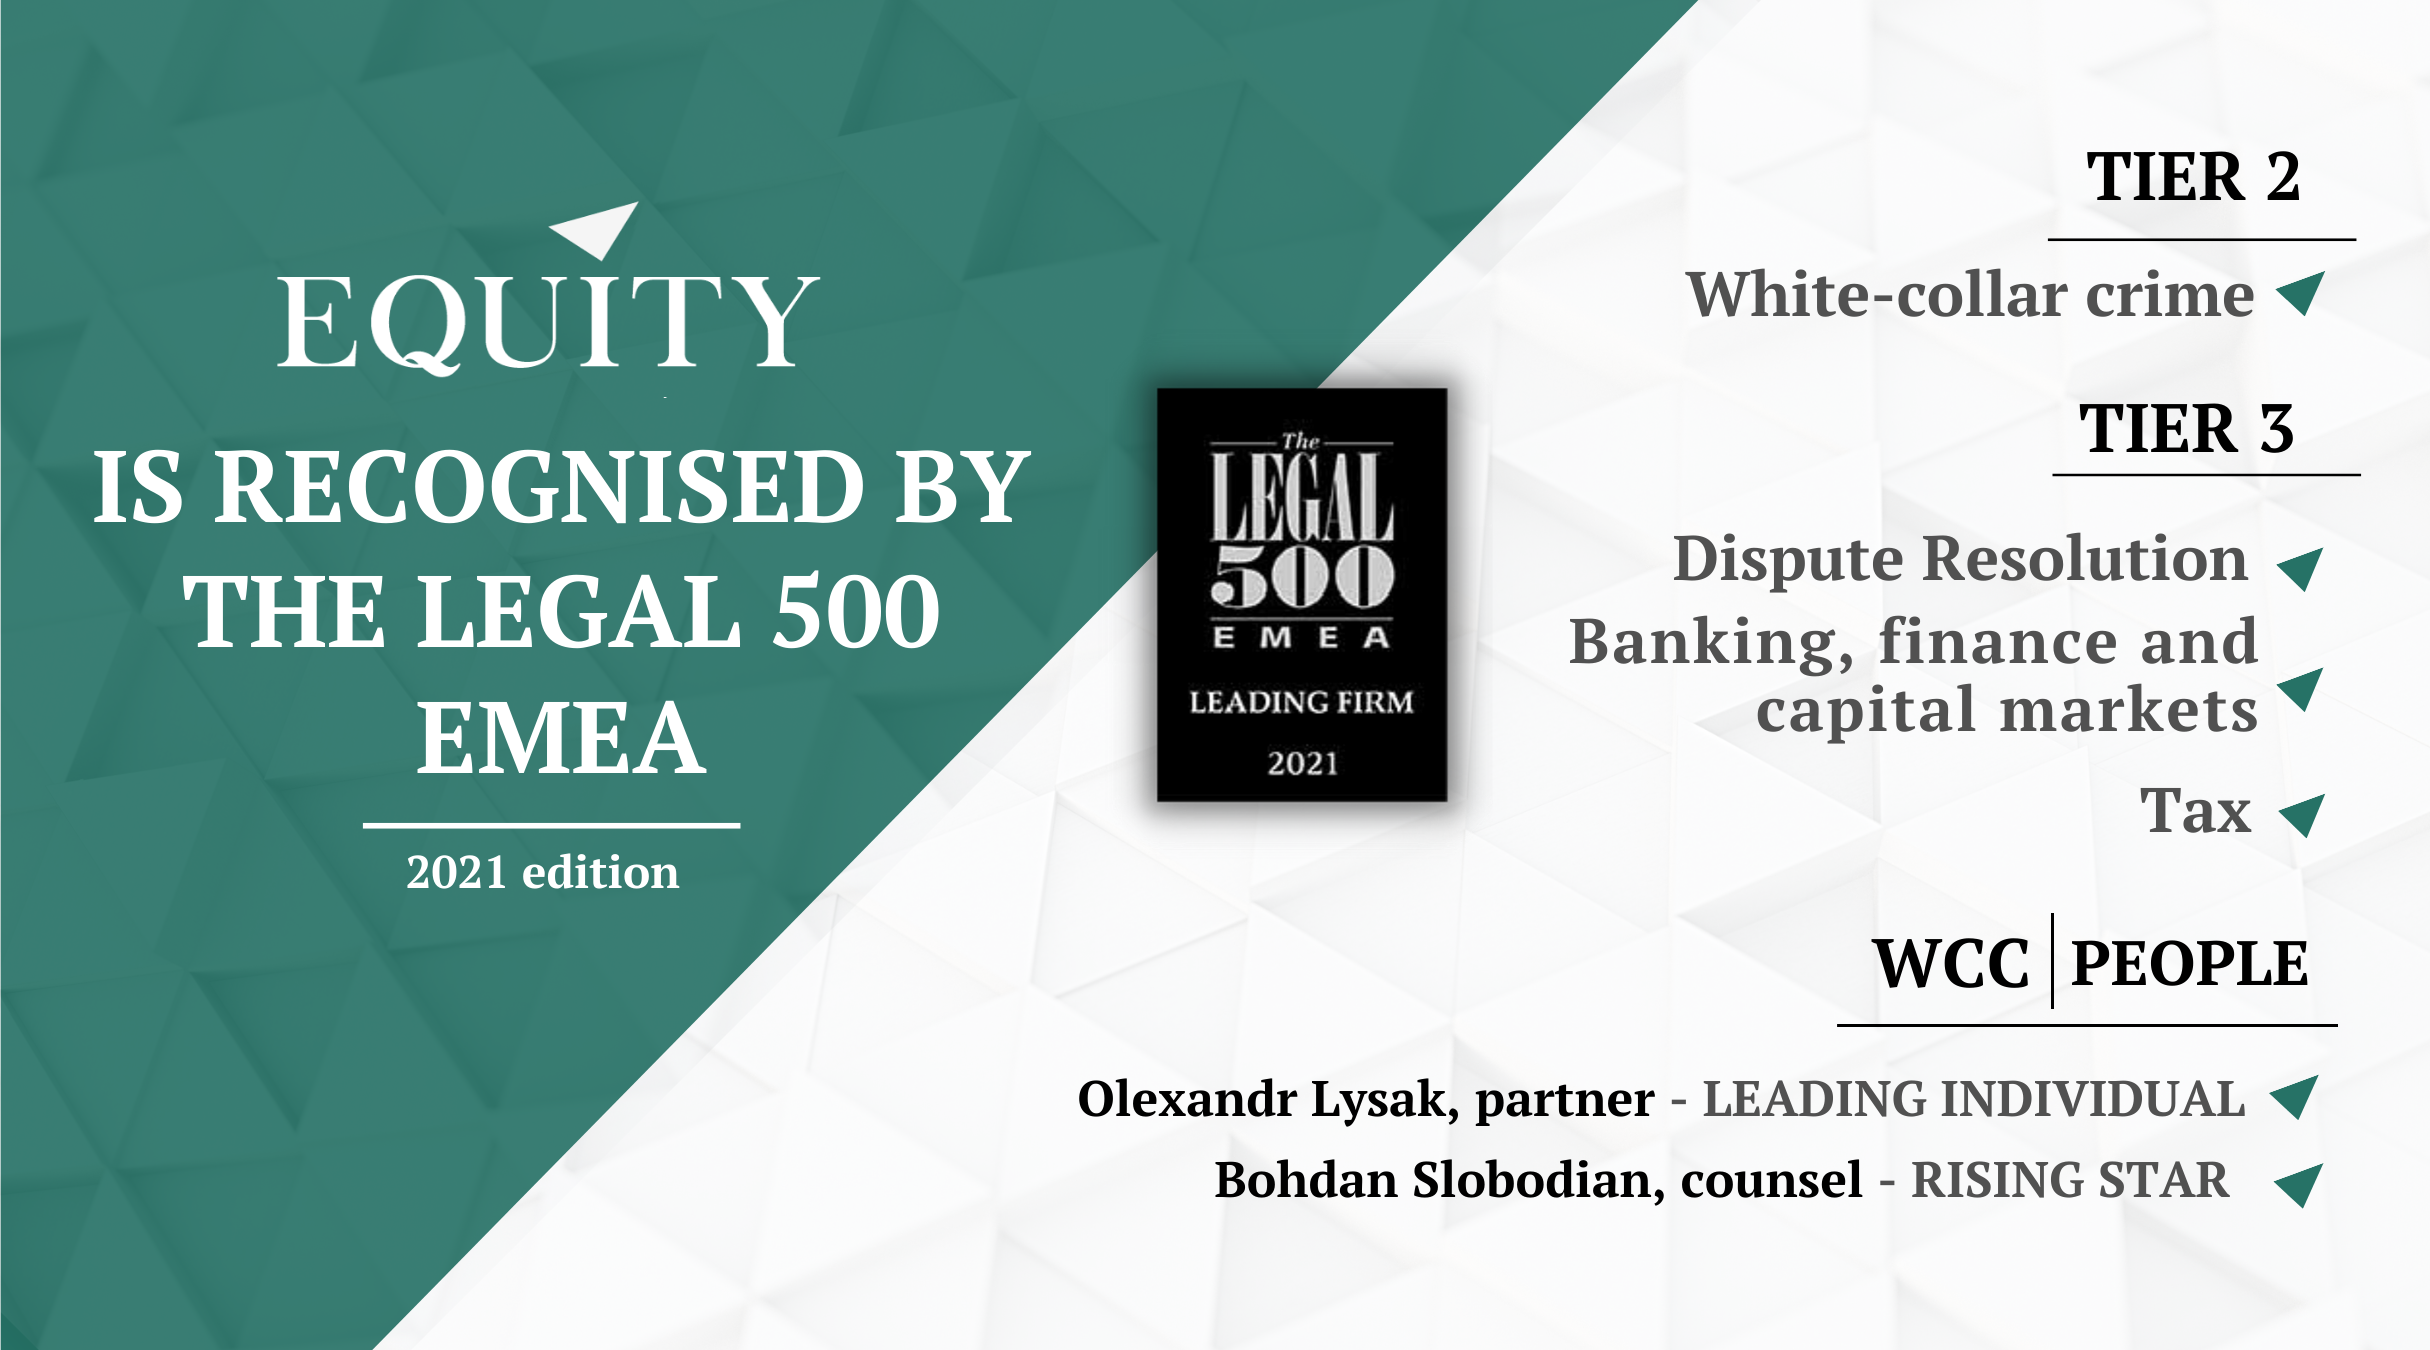 EQUITY is recognised by The Legal 500 EMEA in its annual directory!